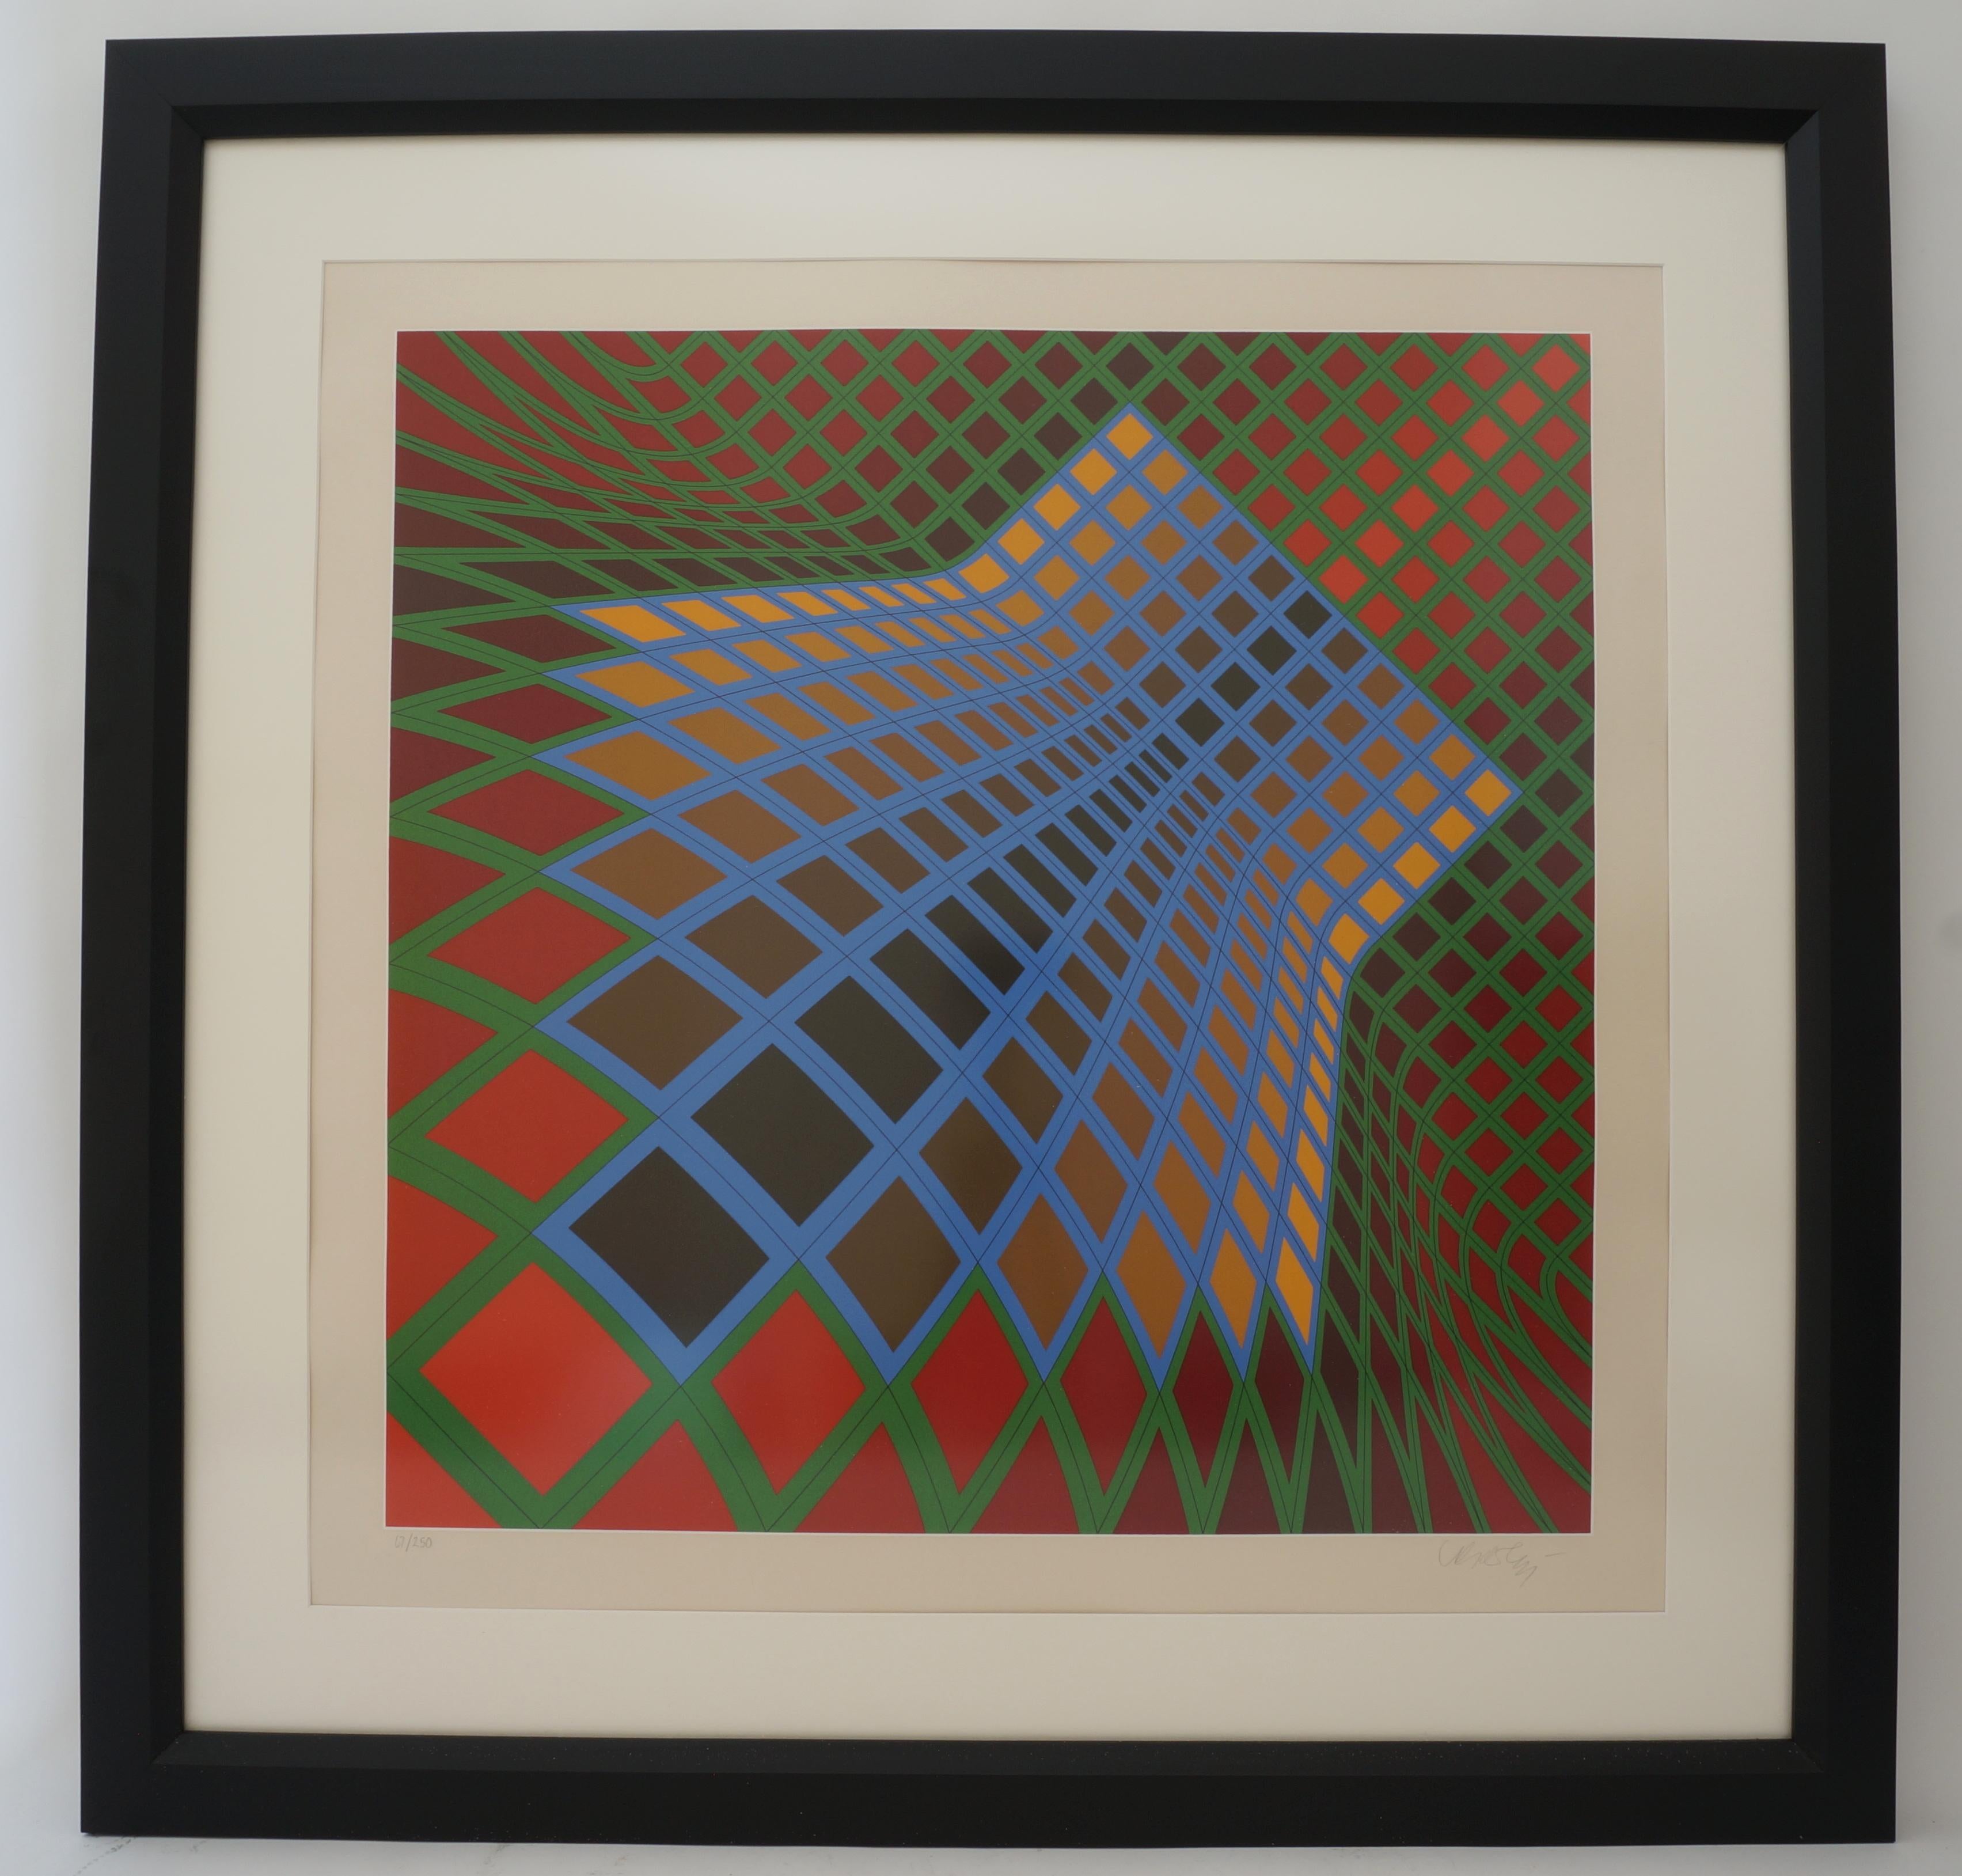 Vintage Vasarely Pencil Signed and Numbered Limited Edition 67/250 Op Art Original Print Custom Framed from a Palm Beach estate

Frame size is 38 h x 38 w x 1 3/8